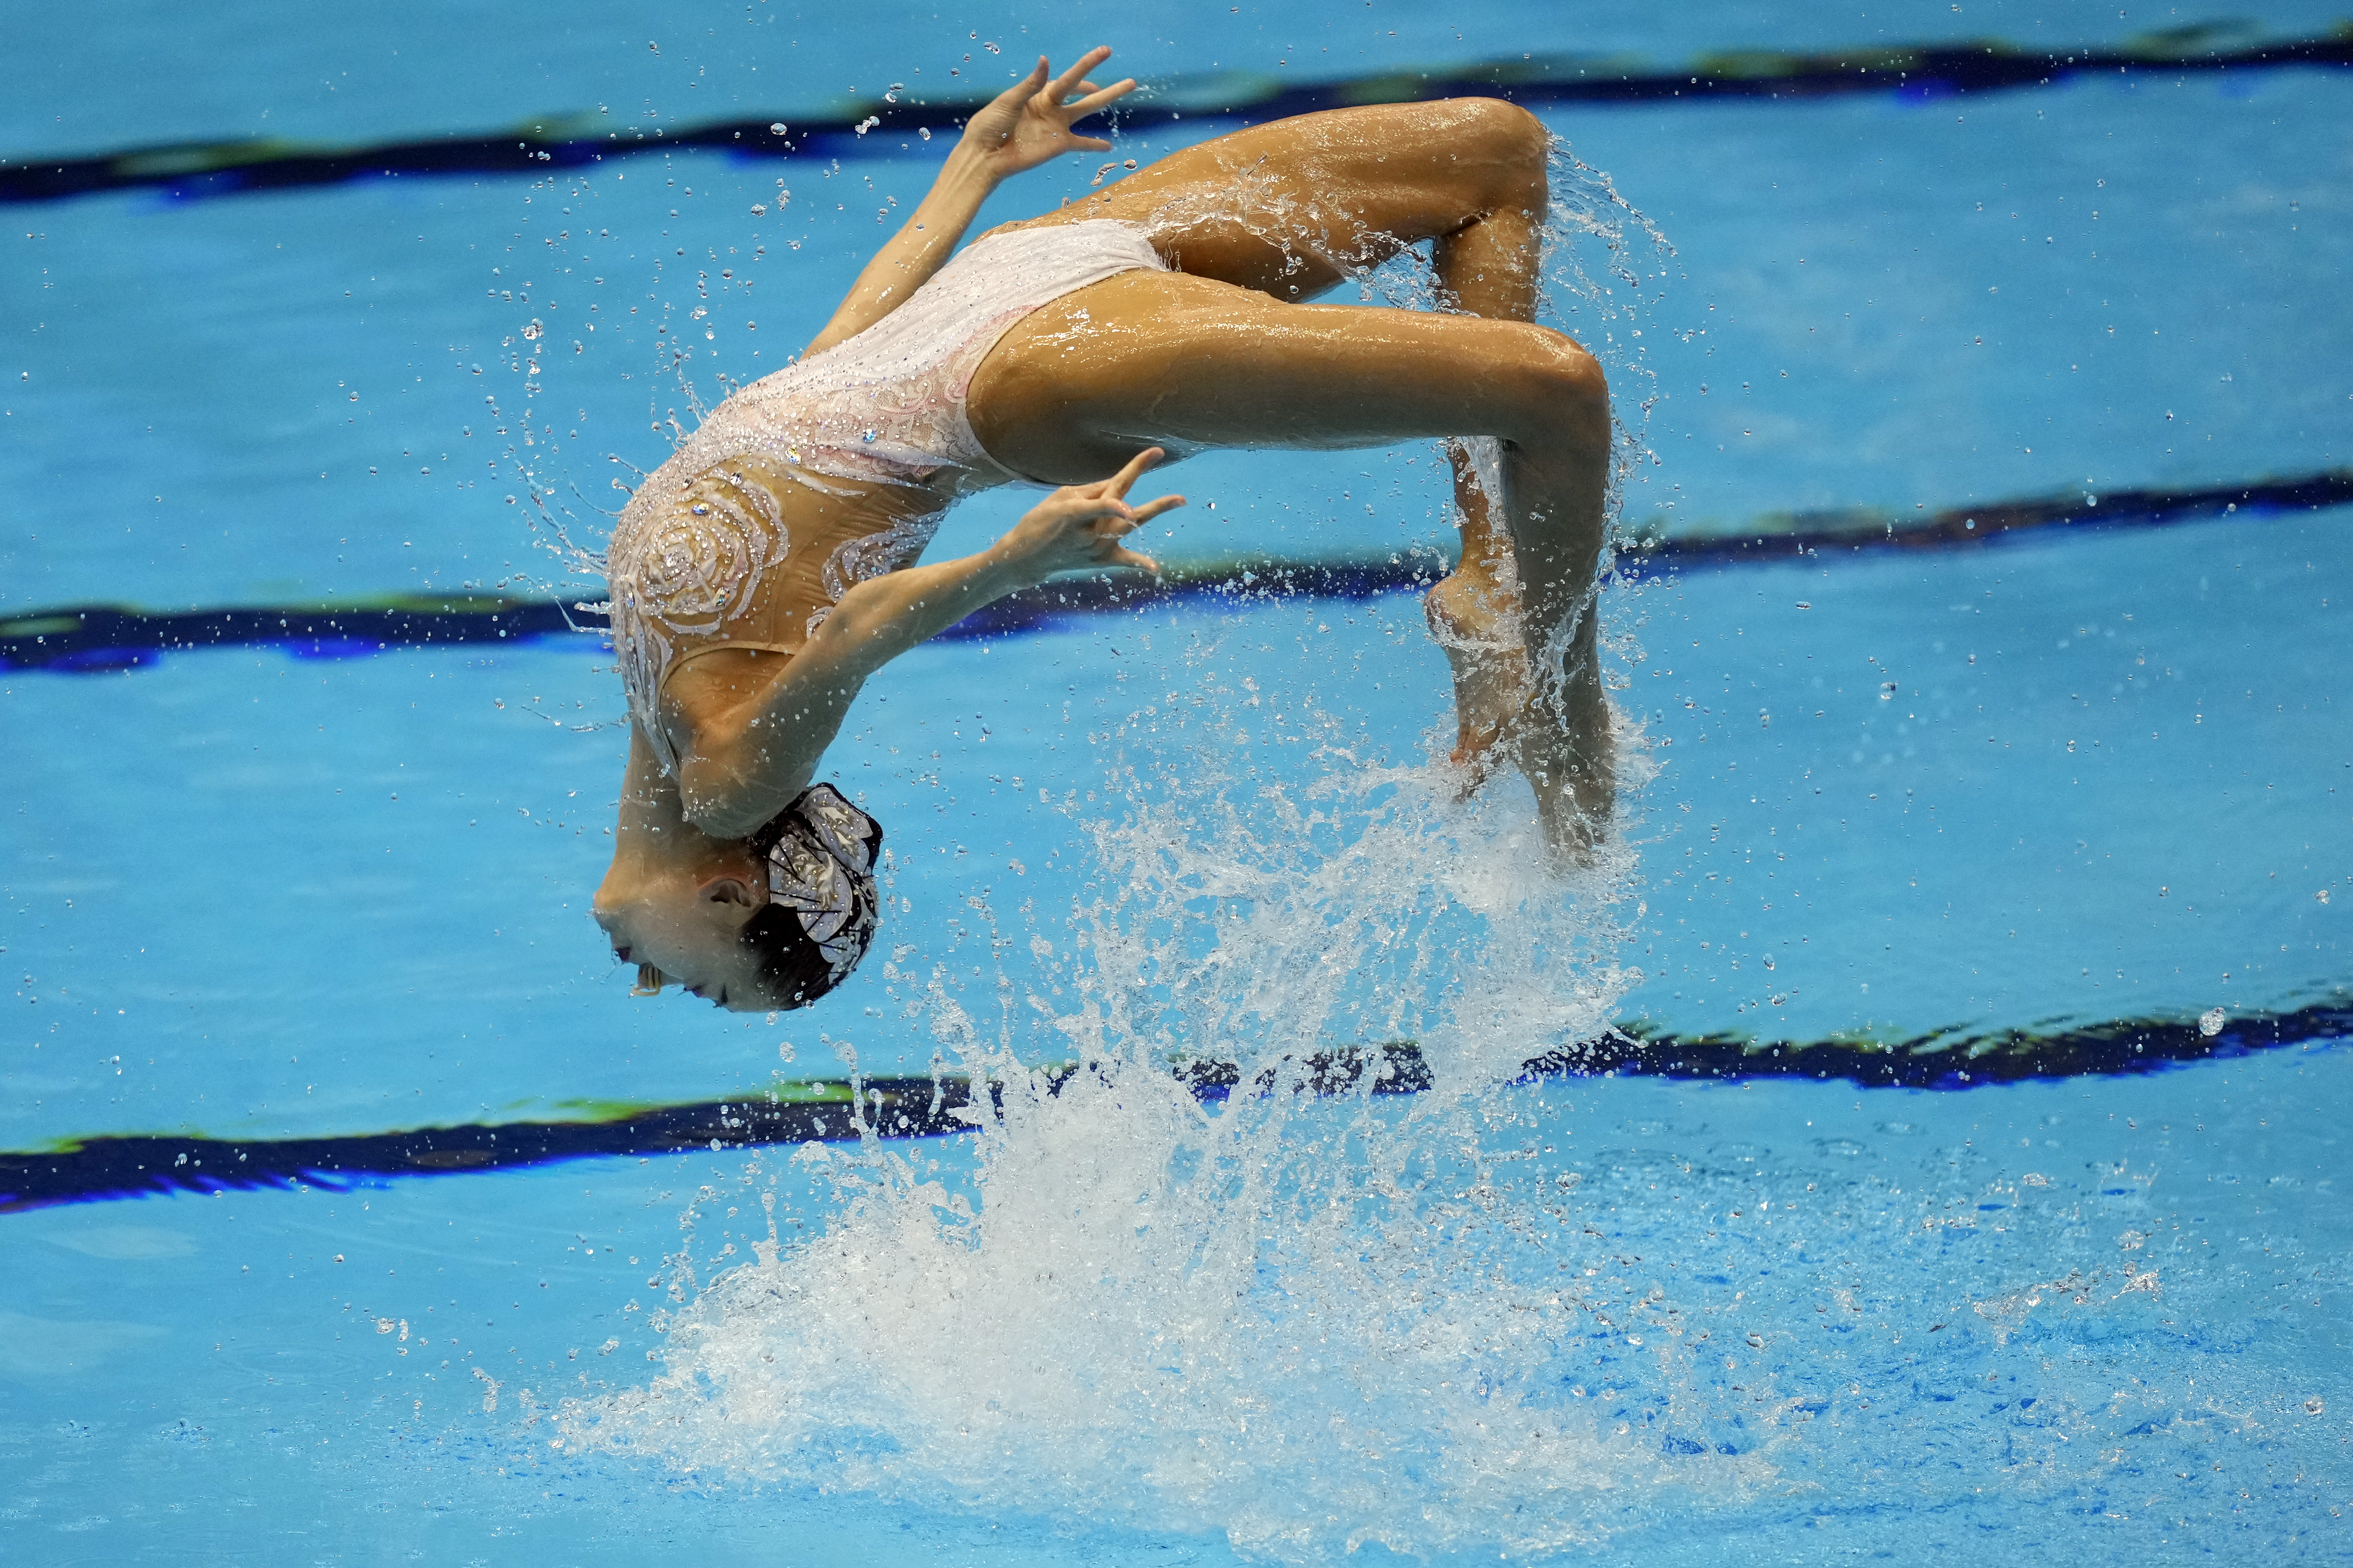 China's Cheng Wentao with Shi Haoyu, under water, compete during the mixed duet free preliminary of the artistic swimming at the World Swimming Championships in Fukuoka, Japan,Friday, July 21, 2023. (AP Photo/Eugene Hoshiko)